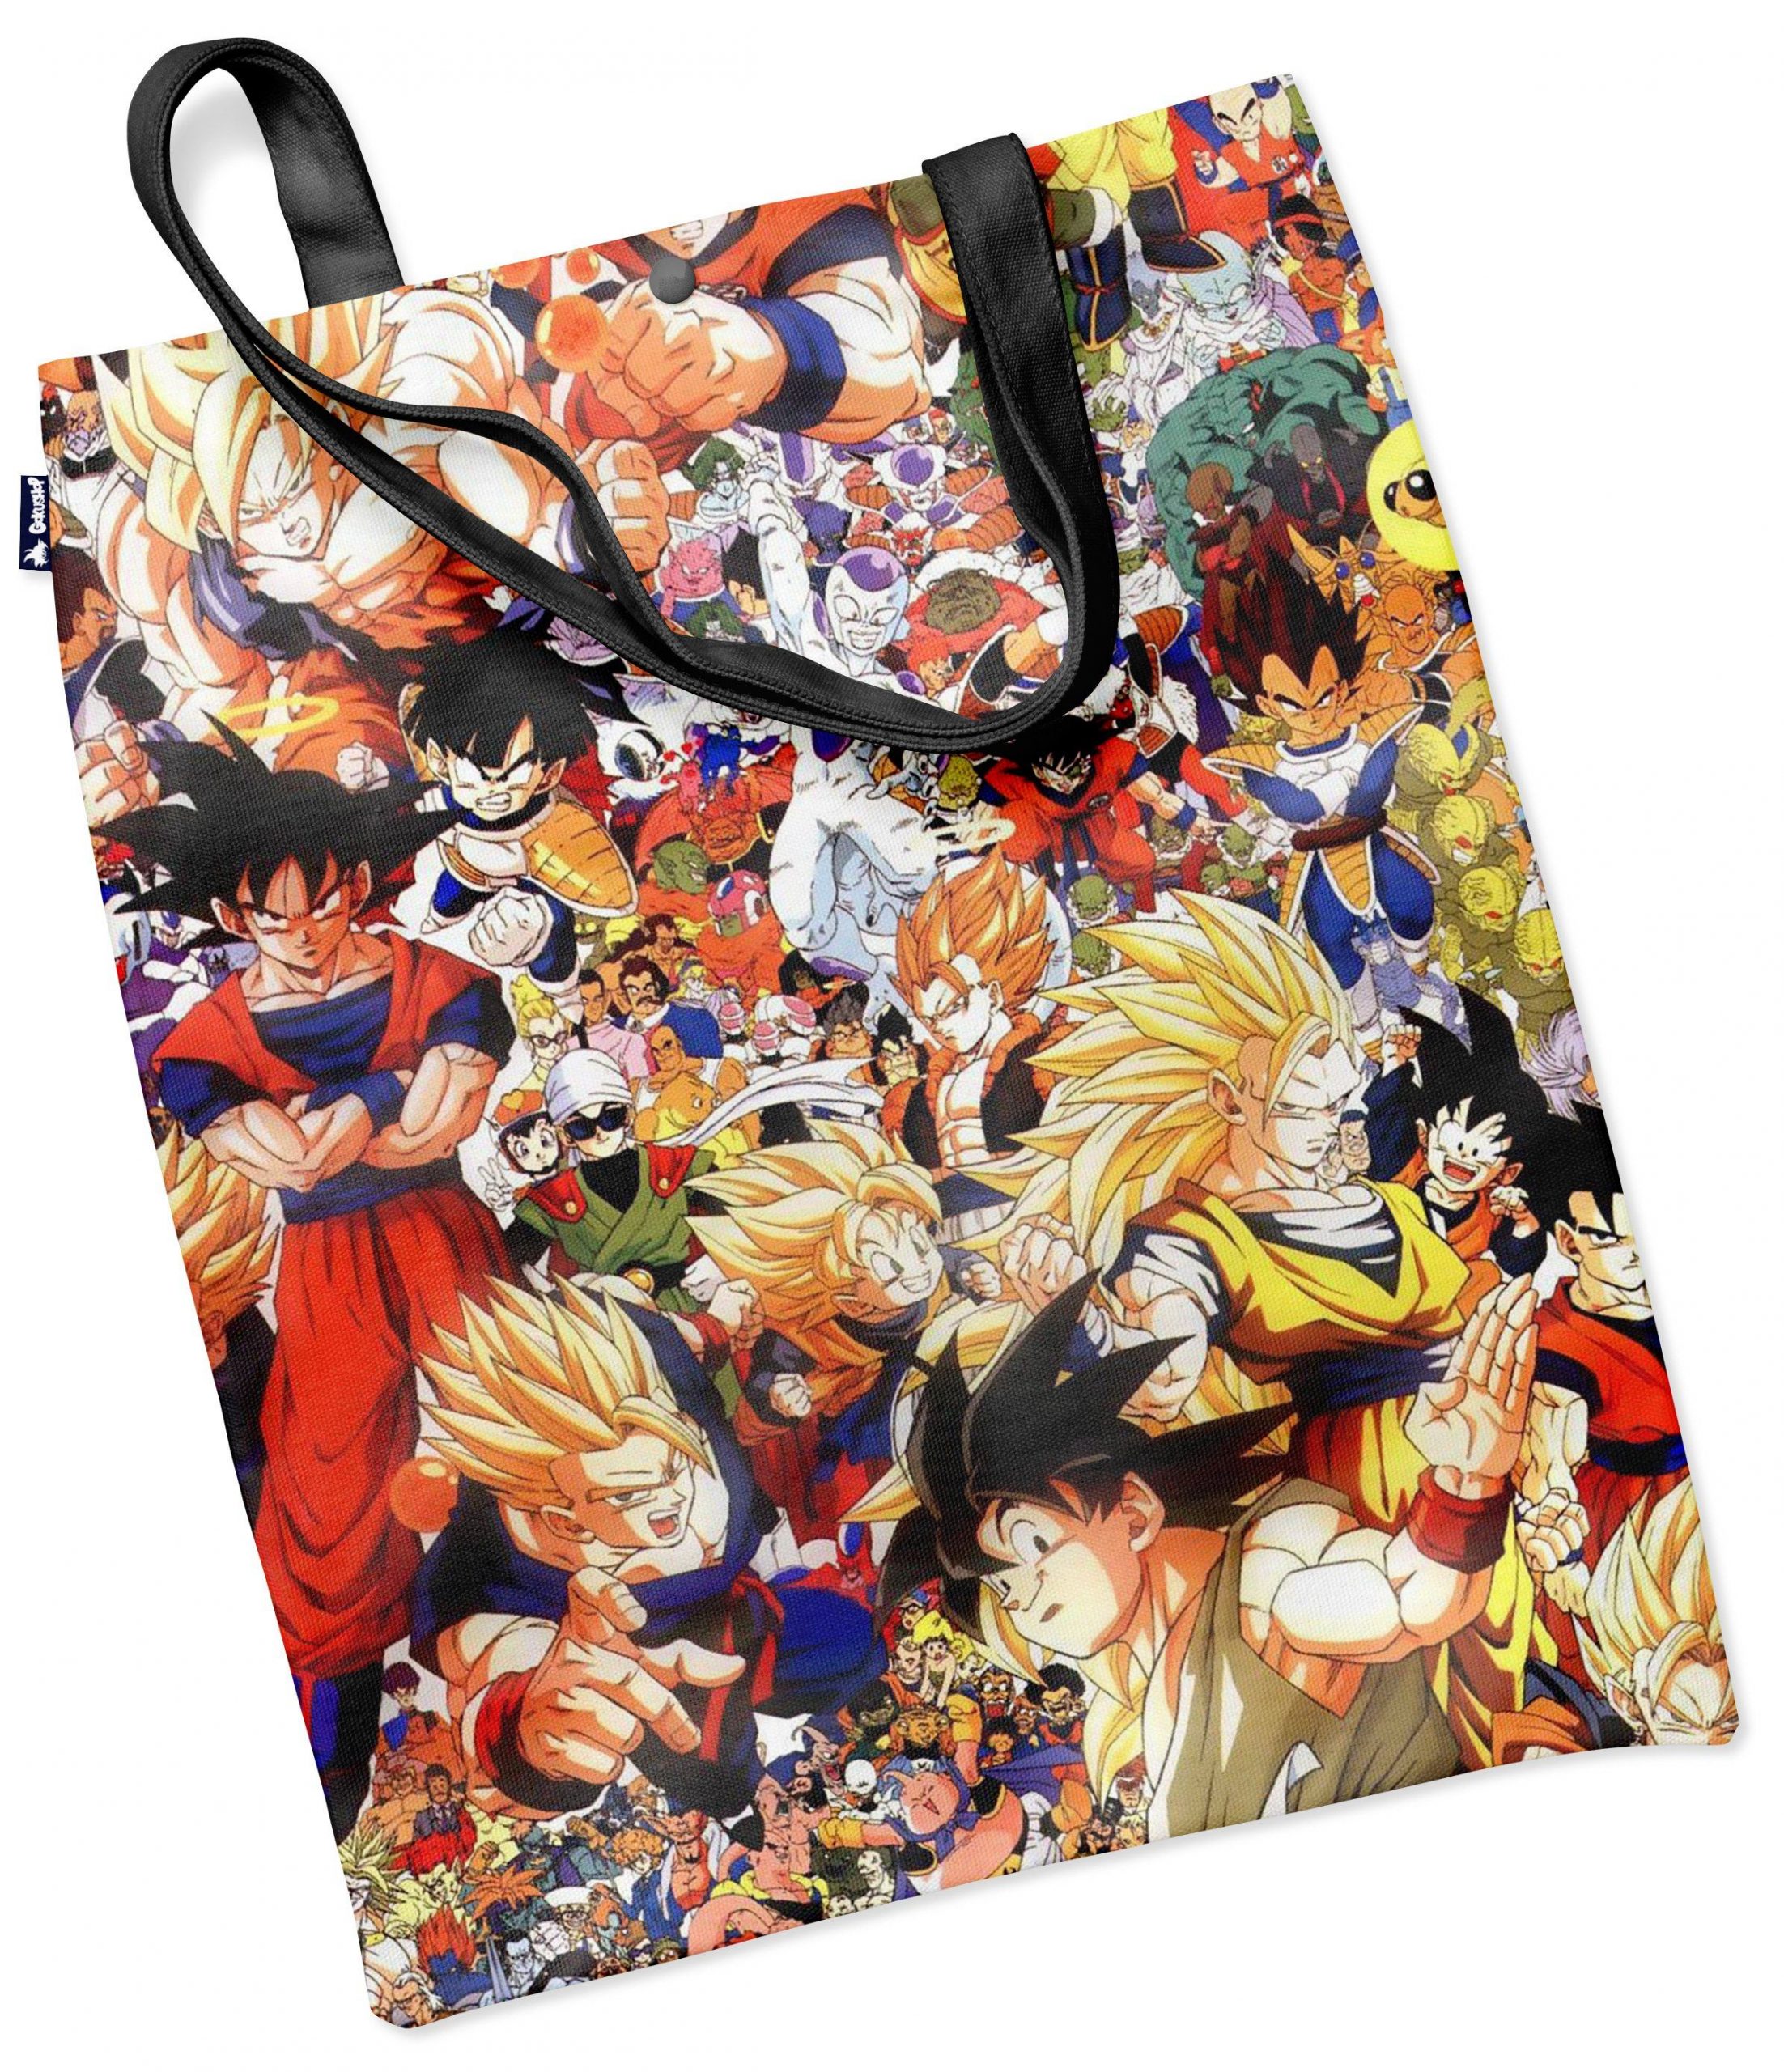 Dragon Ball Tote Bag Characters Default Title Official Dragon Ball Z Merch